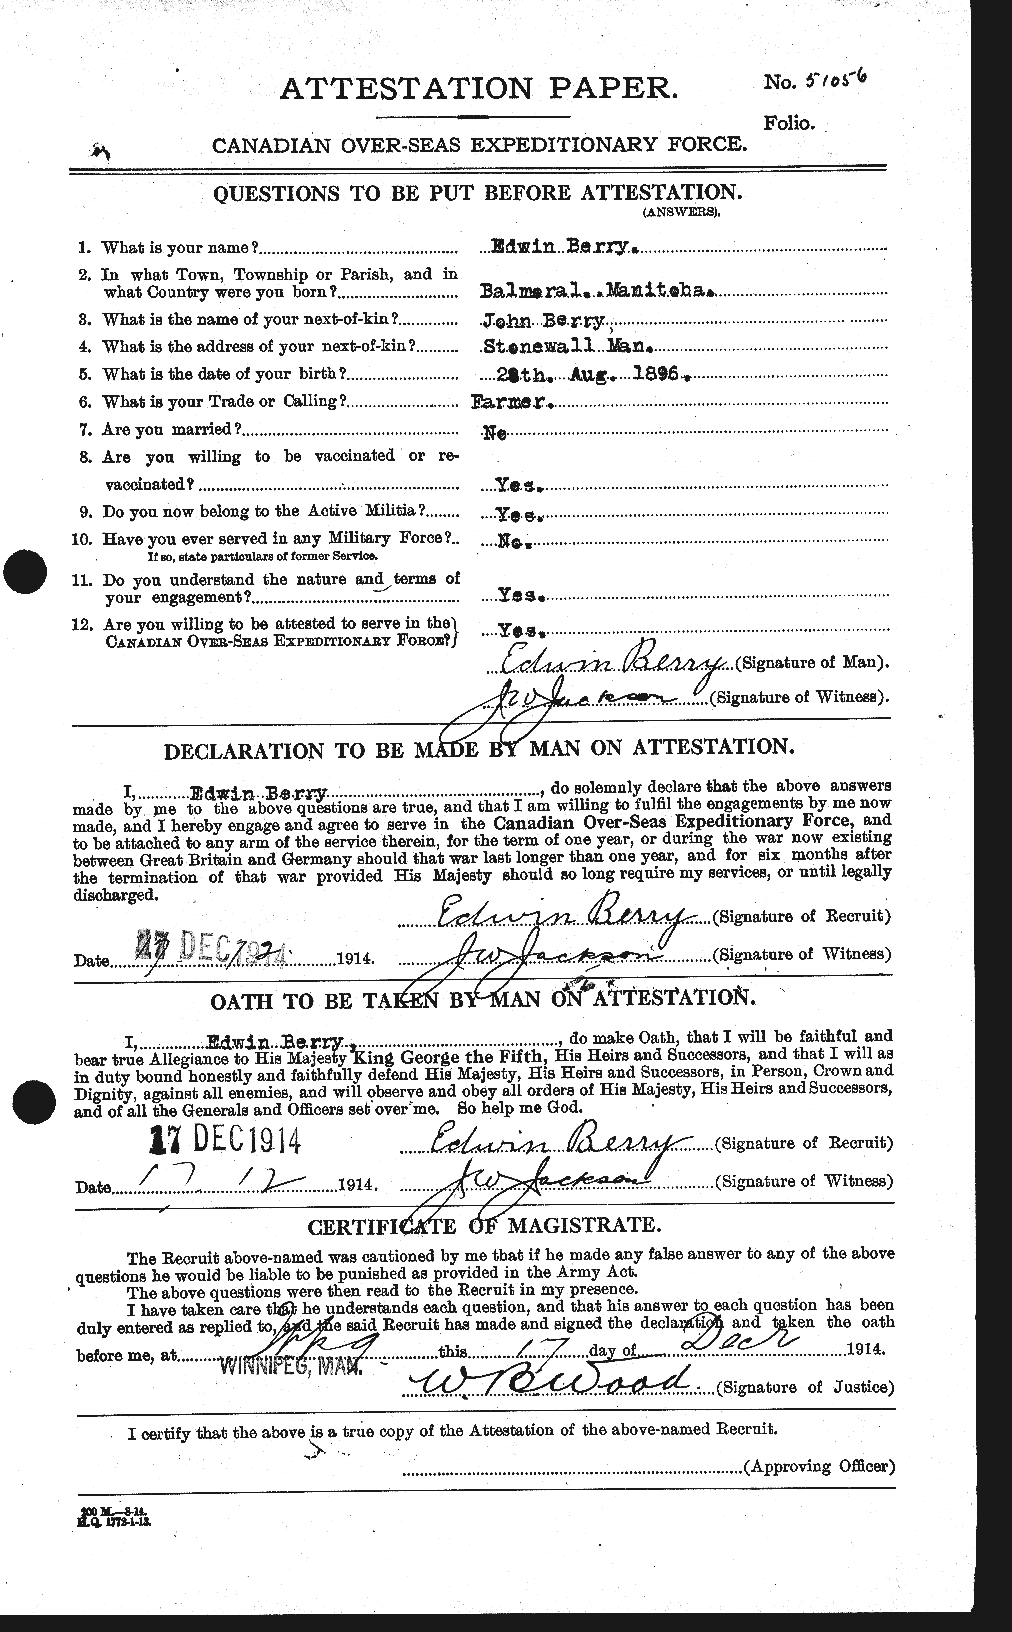 Personnel Records of the First World War - CEF 240849a